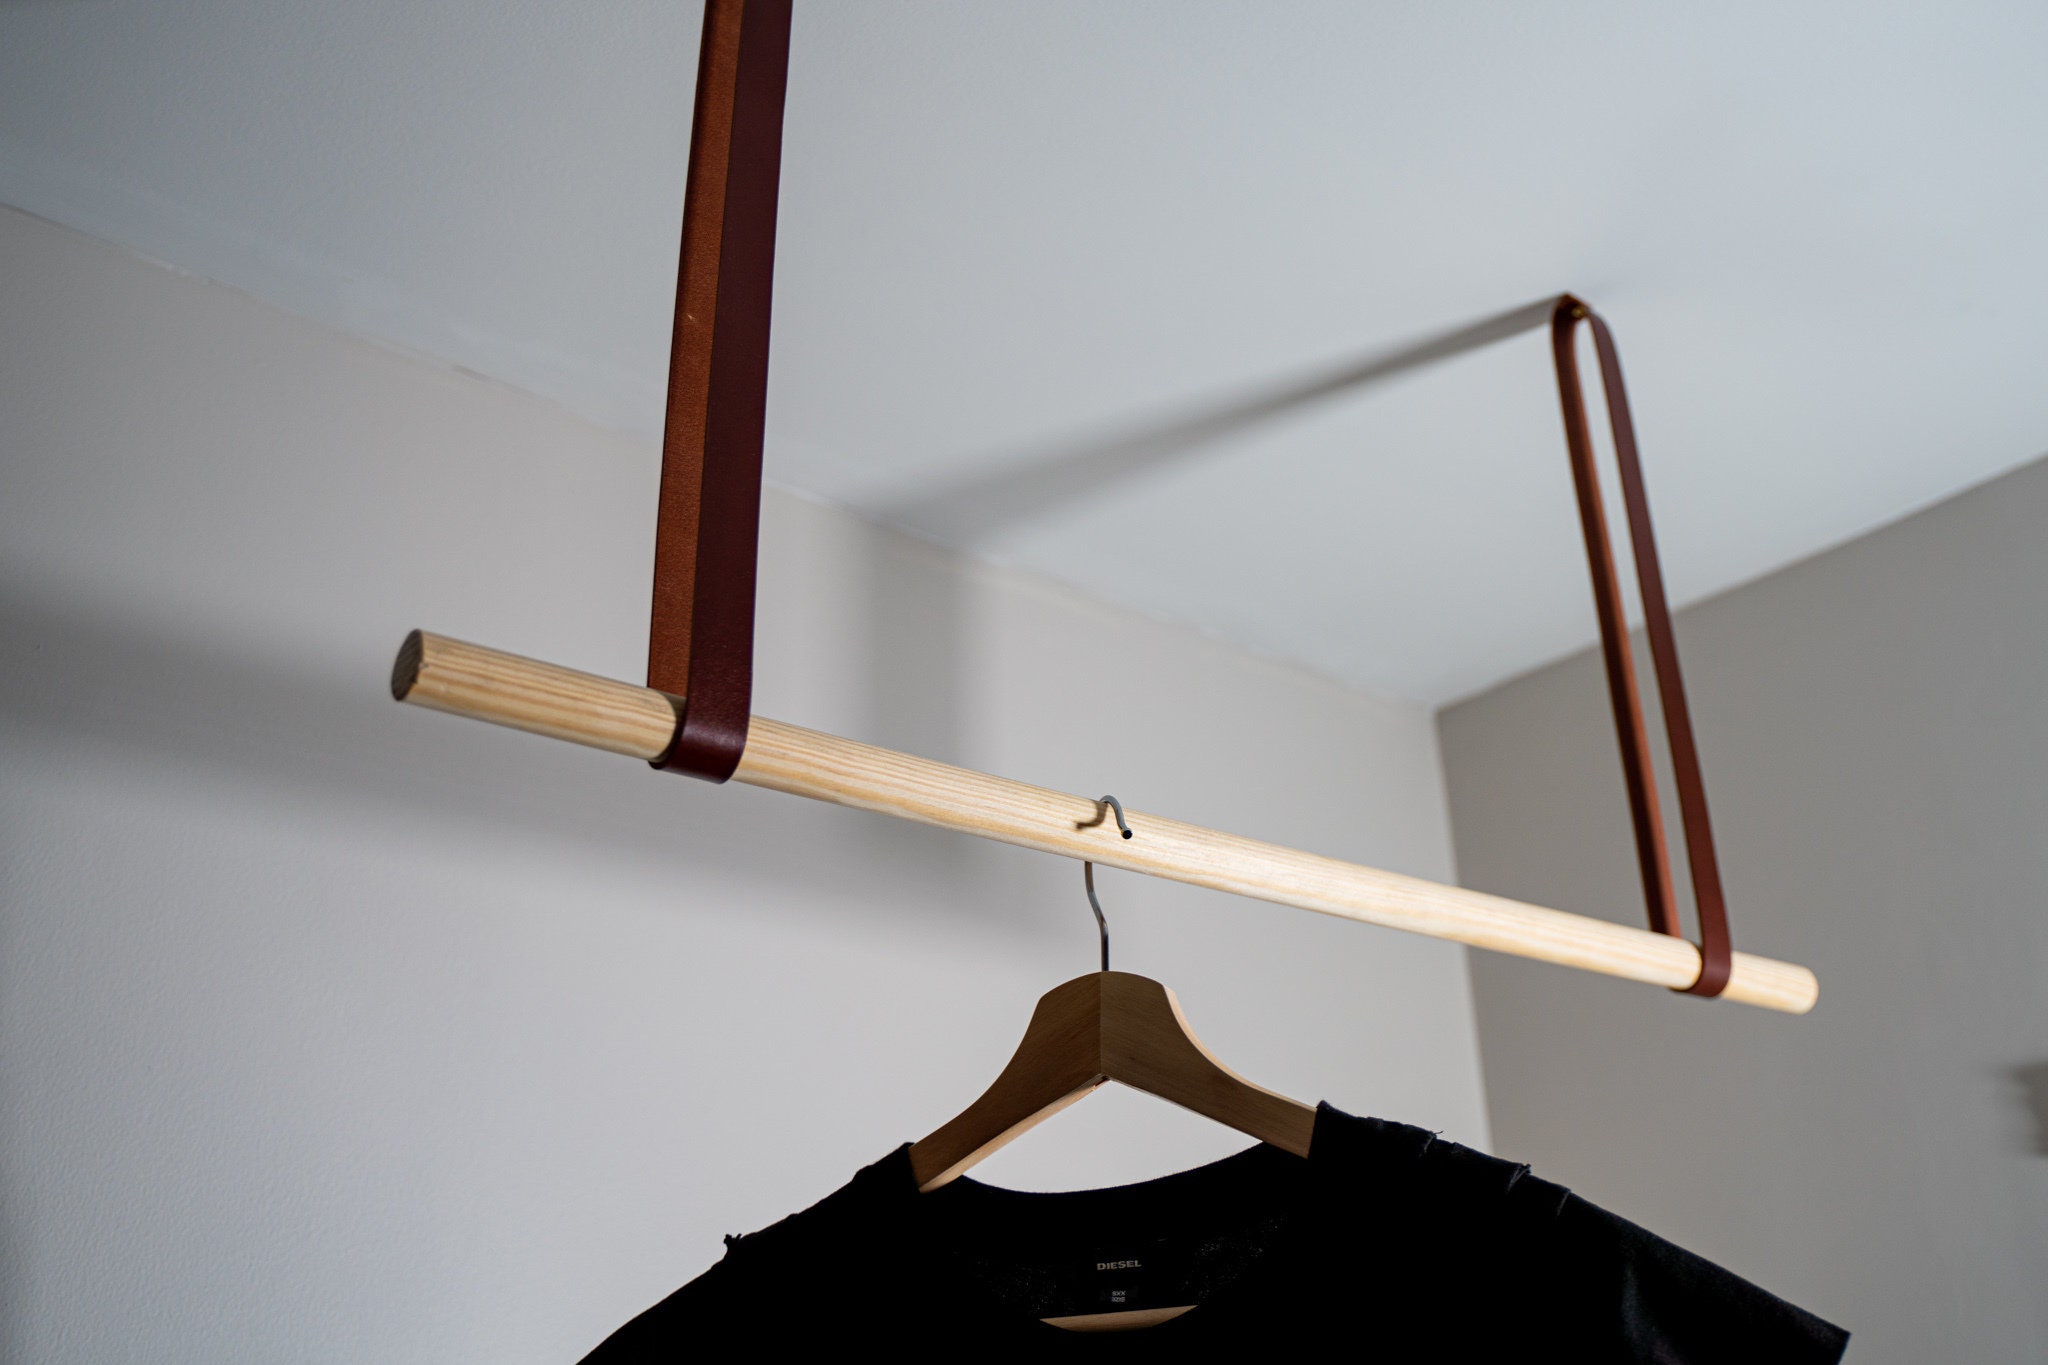 Luxury leather straps for hanging clothes rack - The No. 110